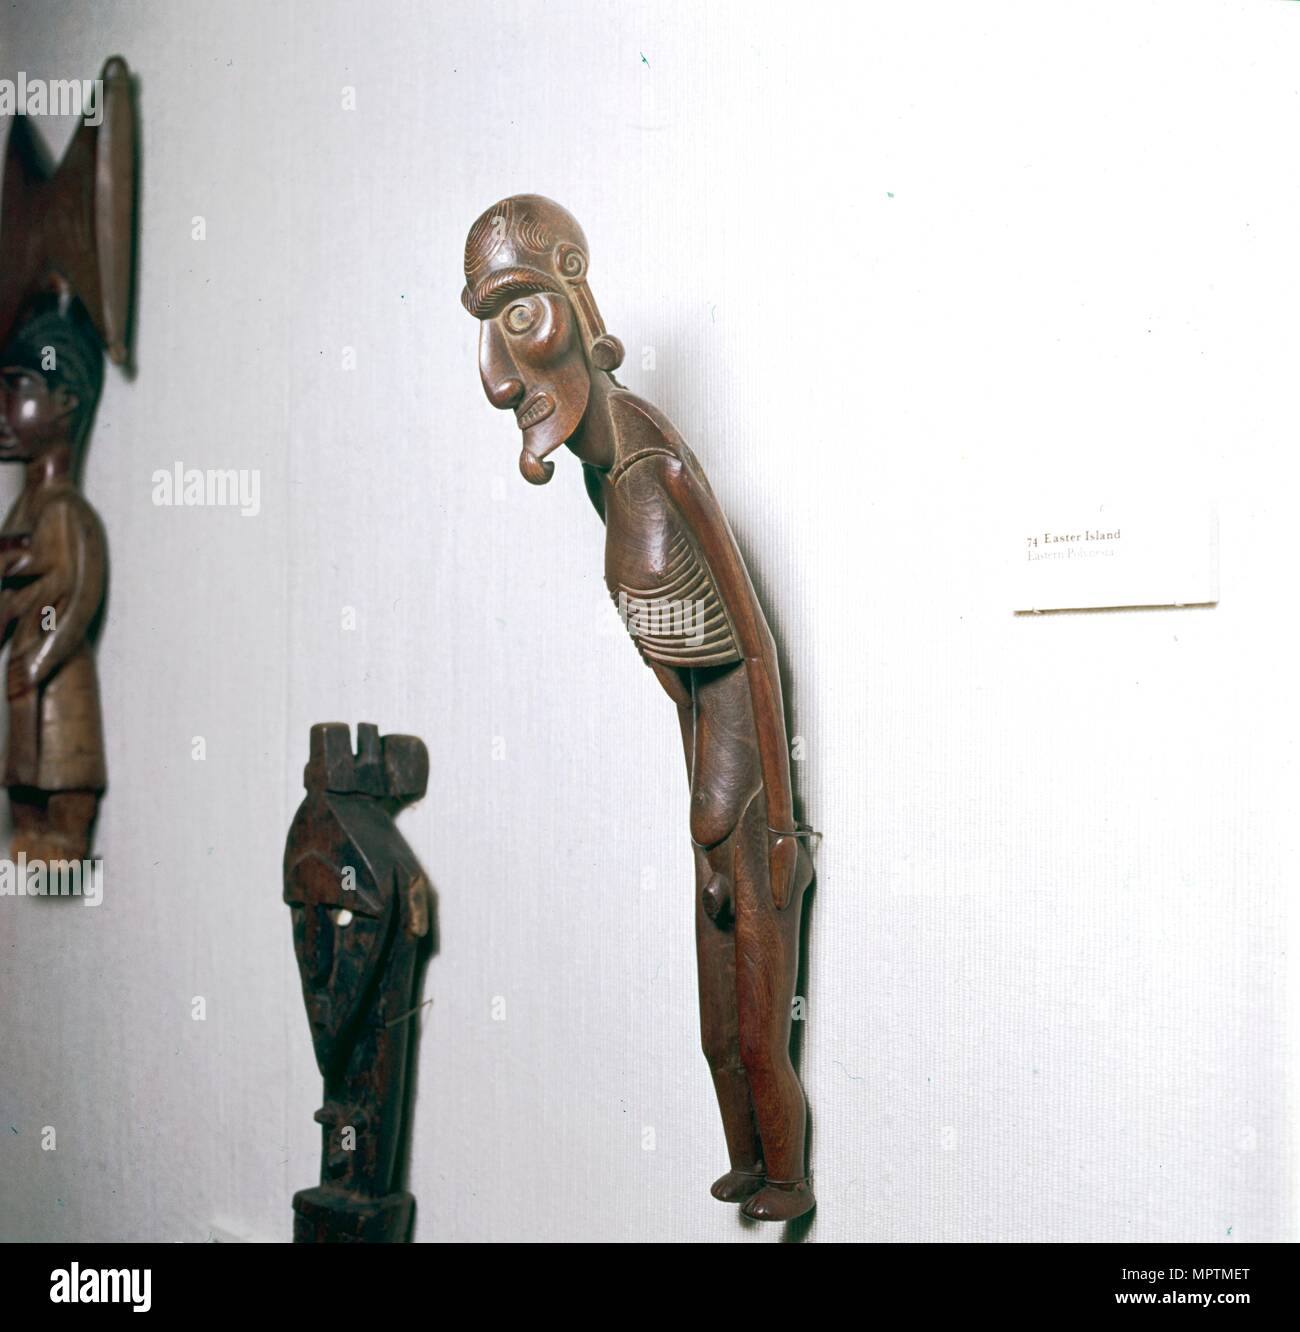 Wooden Ancestor Figure from Easter Island, Polynesia, c19th century. Artist: Unknown. Stock Photo